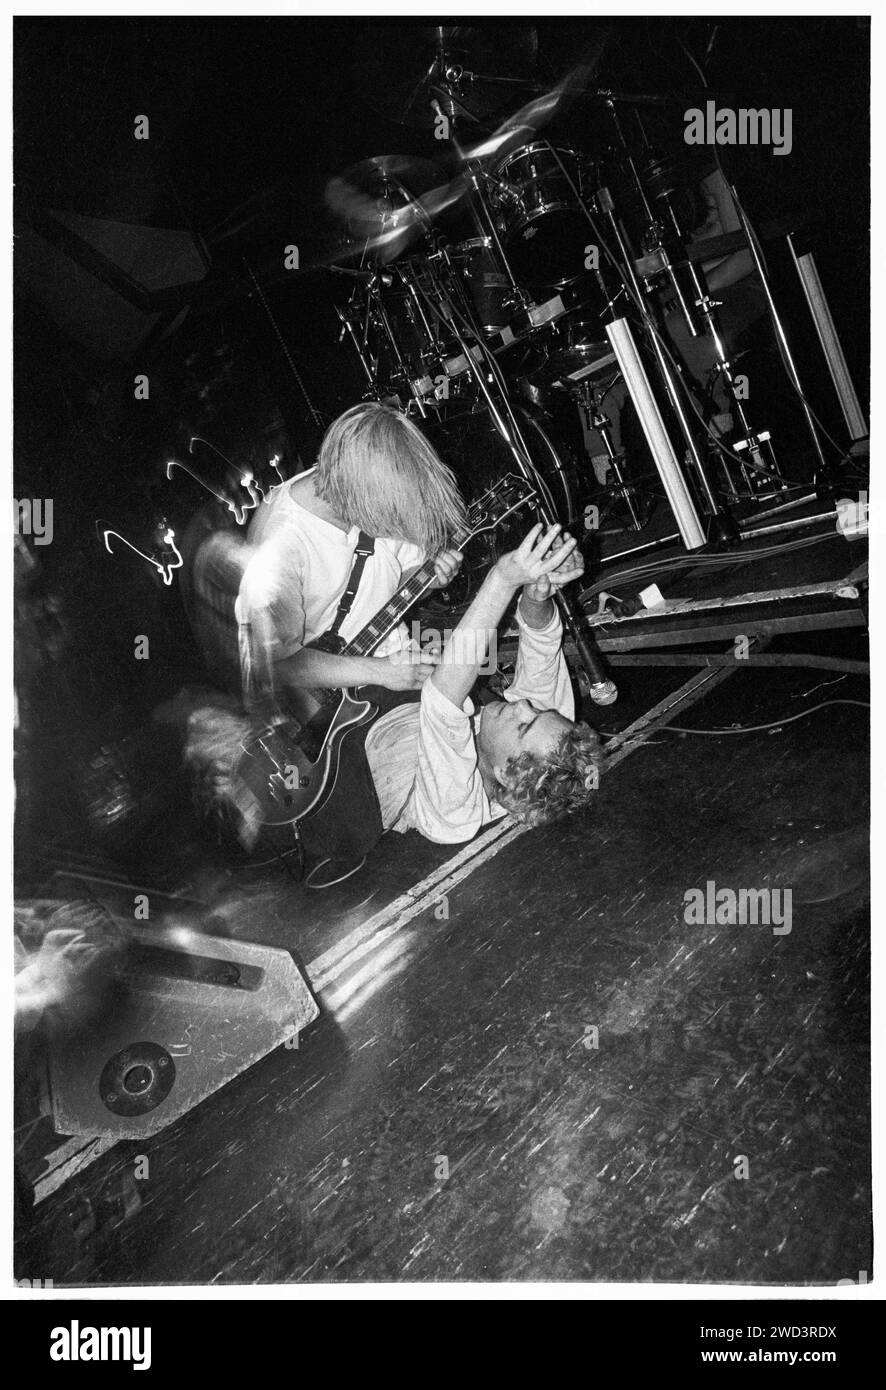 Singer Josephmary and guitarist Garret Jacknife Lee of punk band Compulsion playing as support to Manic Street Preachers at Cardiff University Terminal in Cardiff, Wales on 4 February 1994. Photo: Rob Watkins. INFO: Compulsion, an Irish alternative rock band in the '90s. Fusing punk and grunge influences, their energetic sound garnered attention, especially with the album 'Comforter.' Though short-lived, Compulsion left a mark on the alternative music scene. Stock Photo